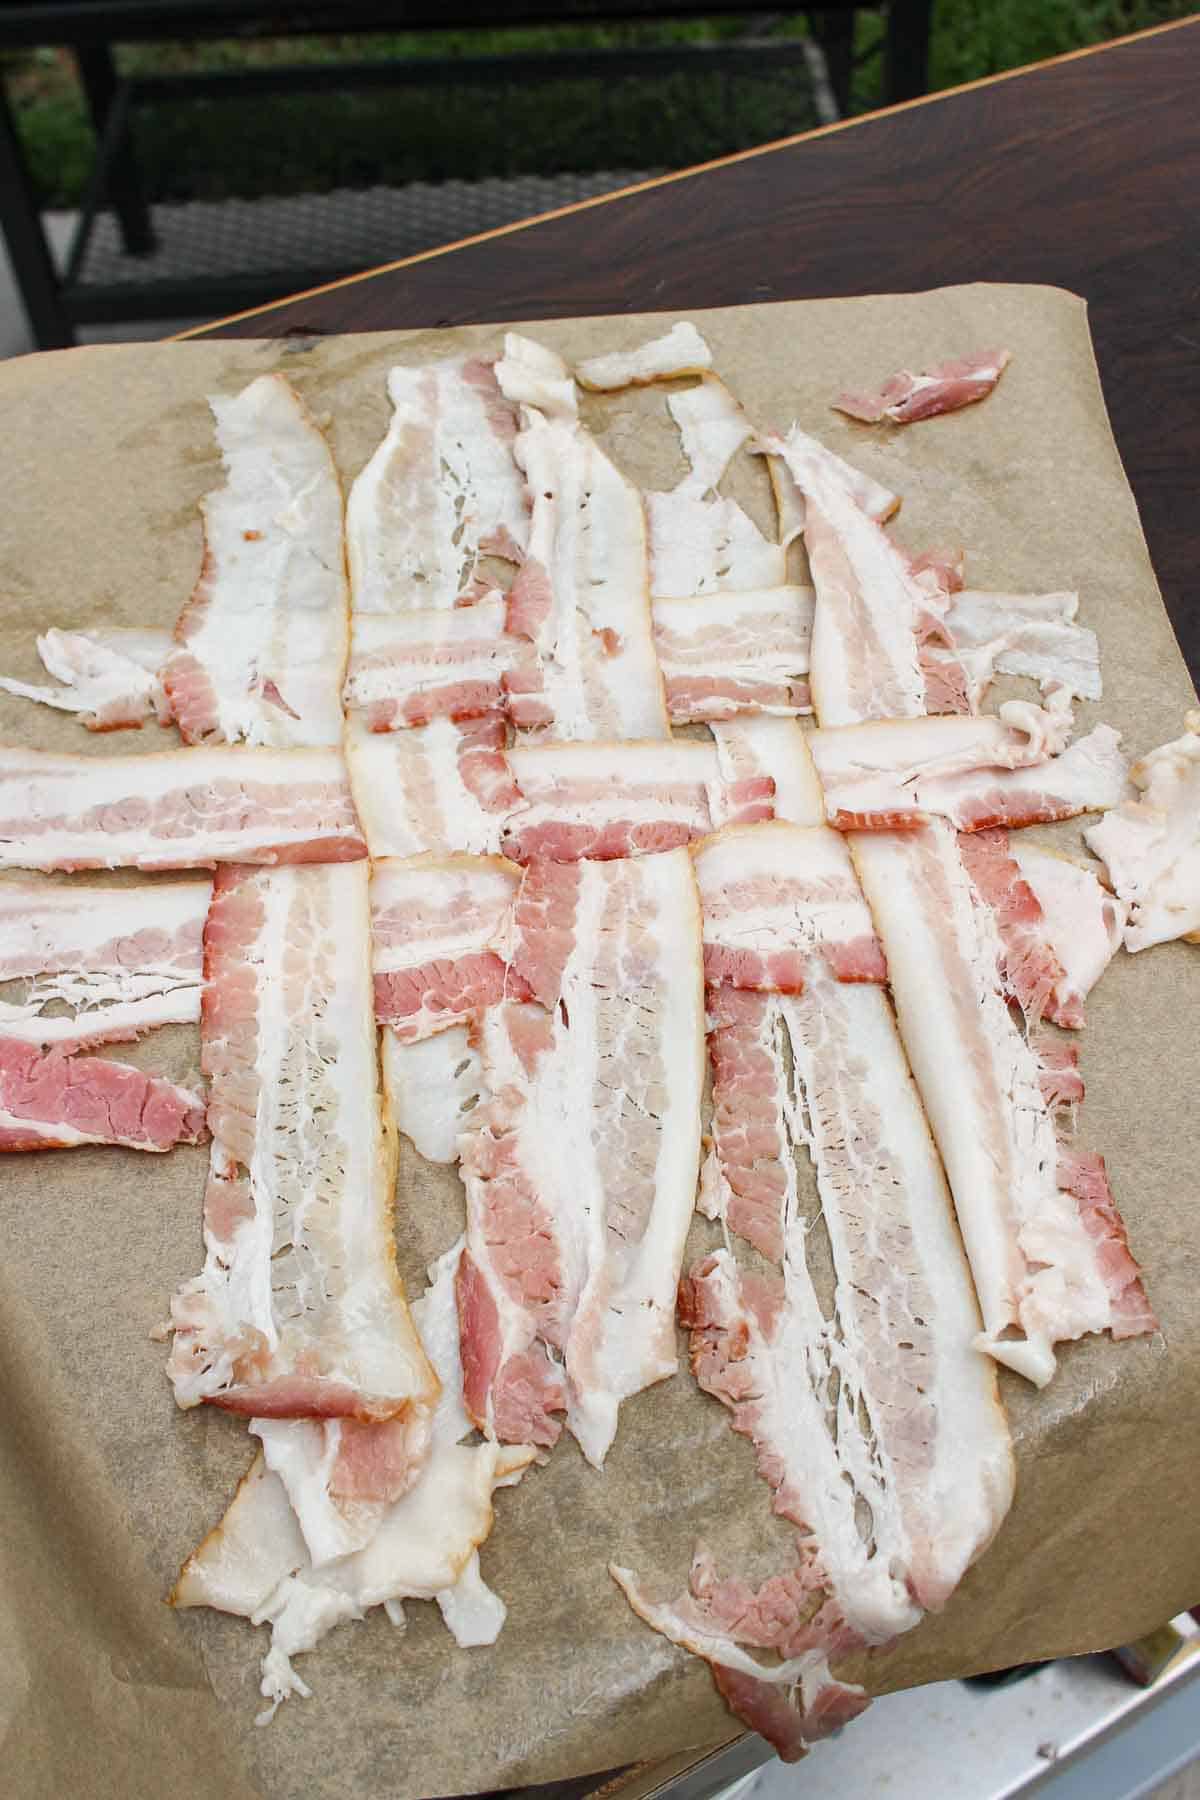 Assembling the bacon weave so we can build the patty inside of it.